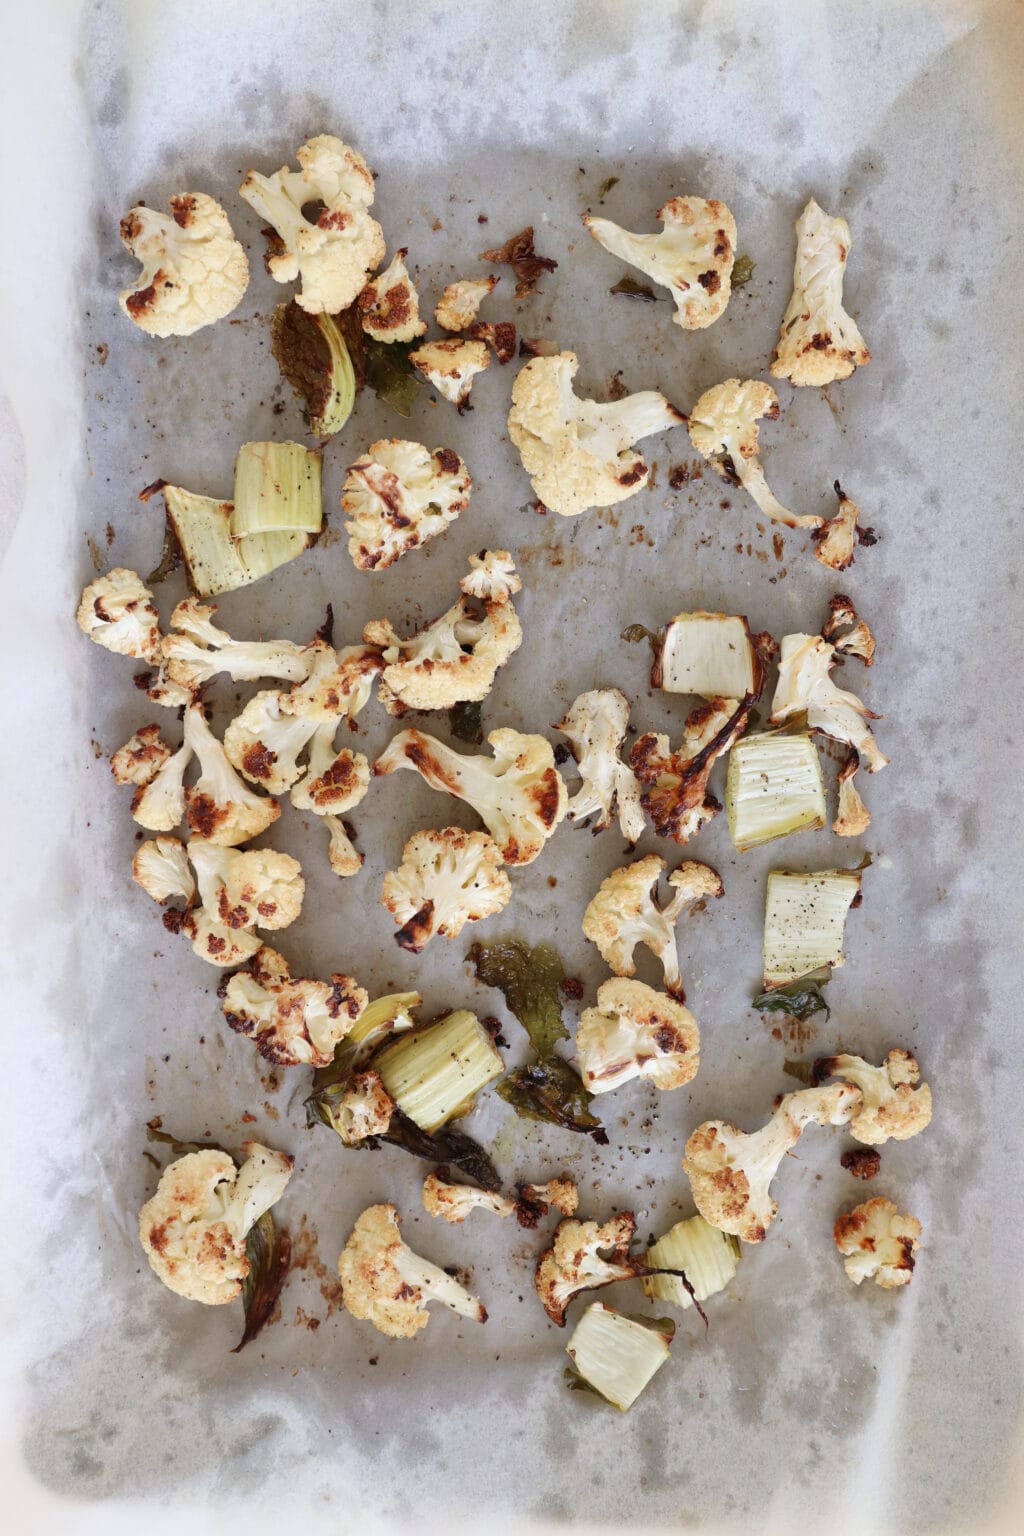 A baking sheet has roasted cauliflower on it. The cauliflower is a nice mix of white and golden brown in color.